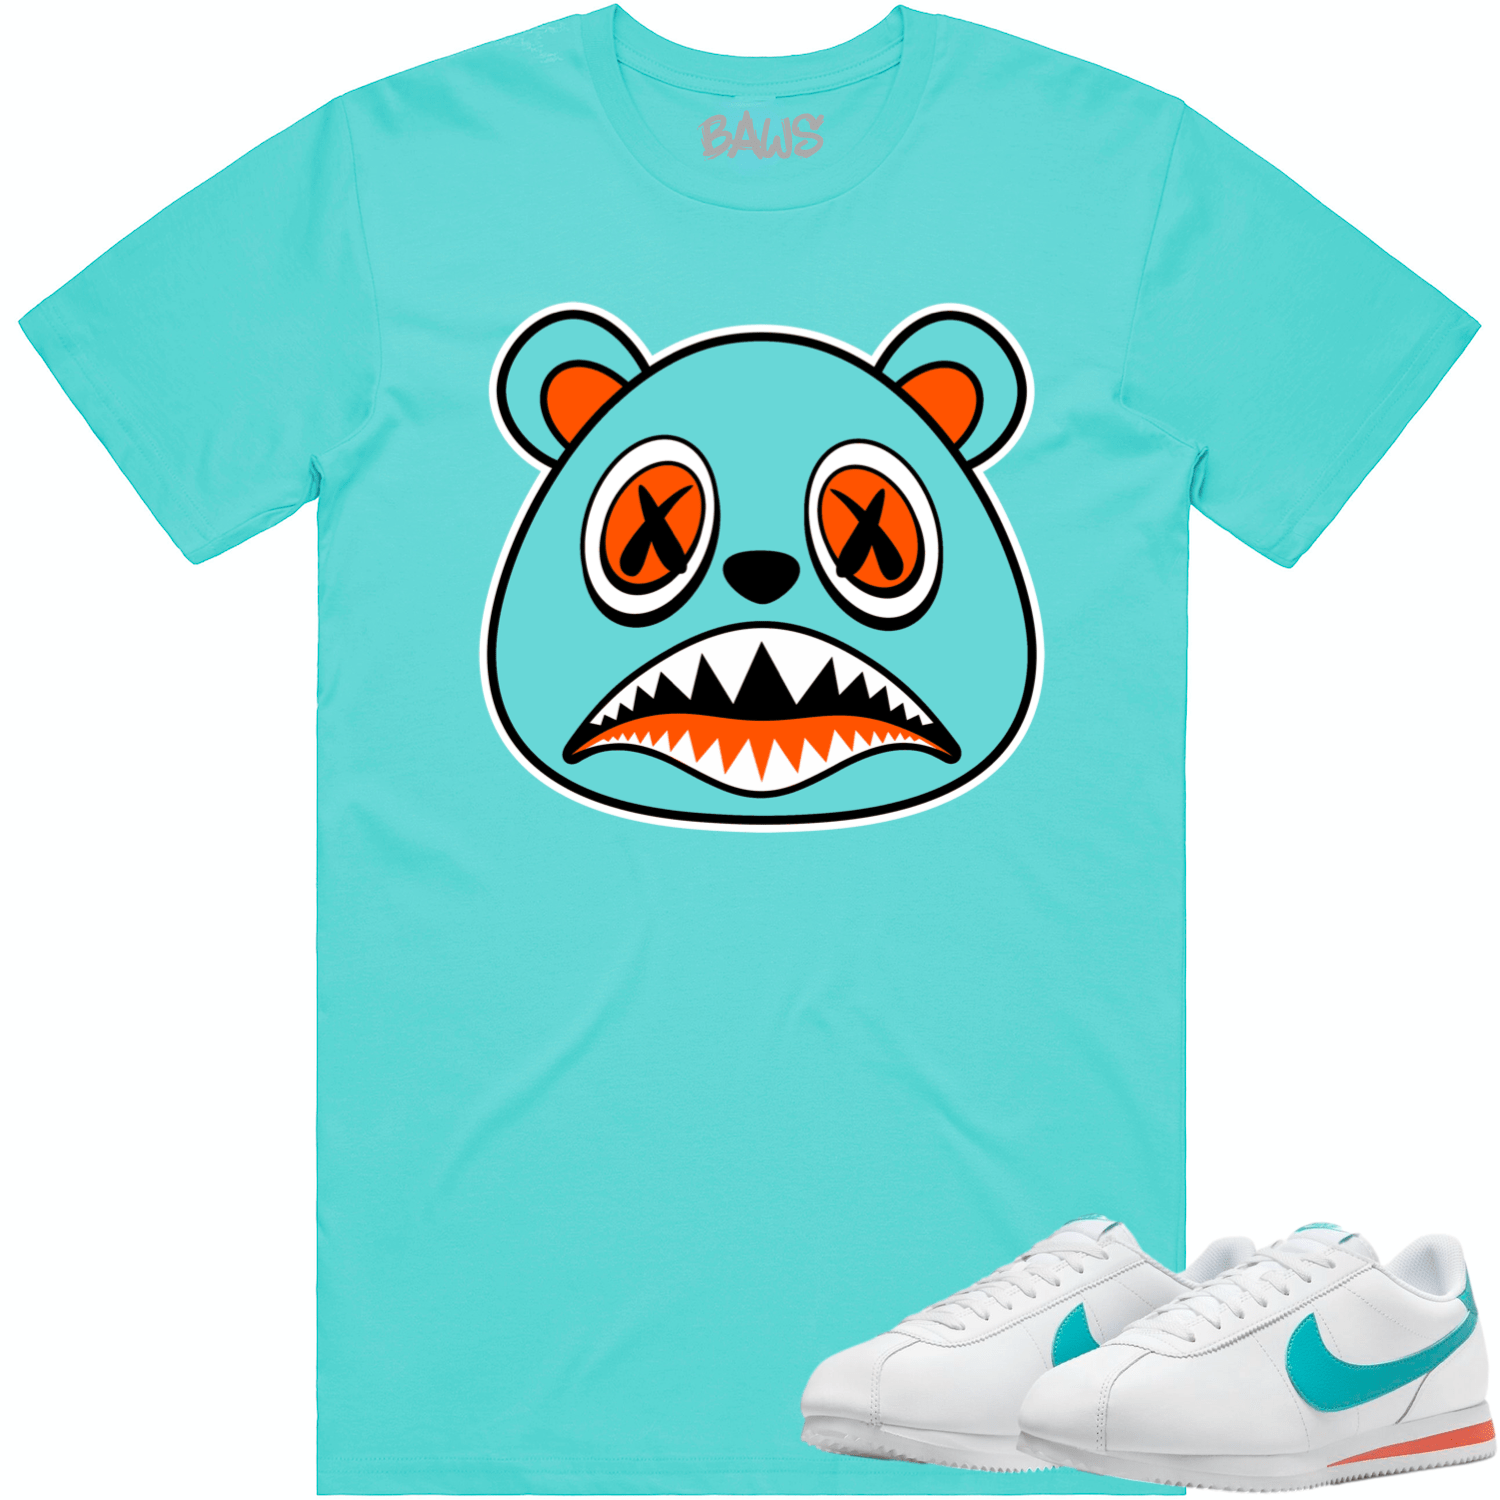 Miami Cortez Dolphins Shirt - Dolphins Sneaker Tees - Baws Bear